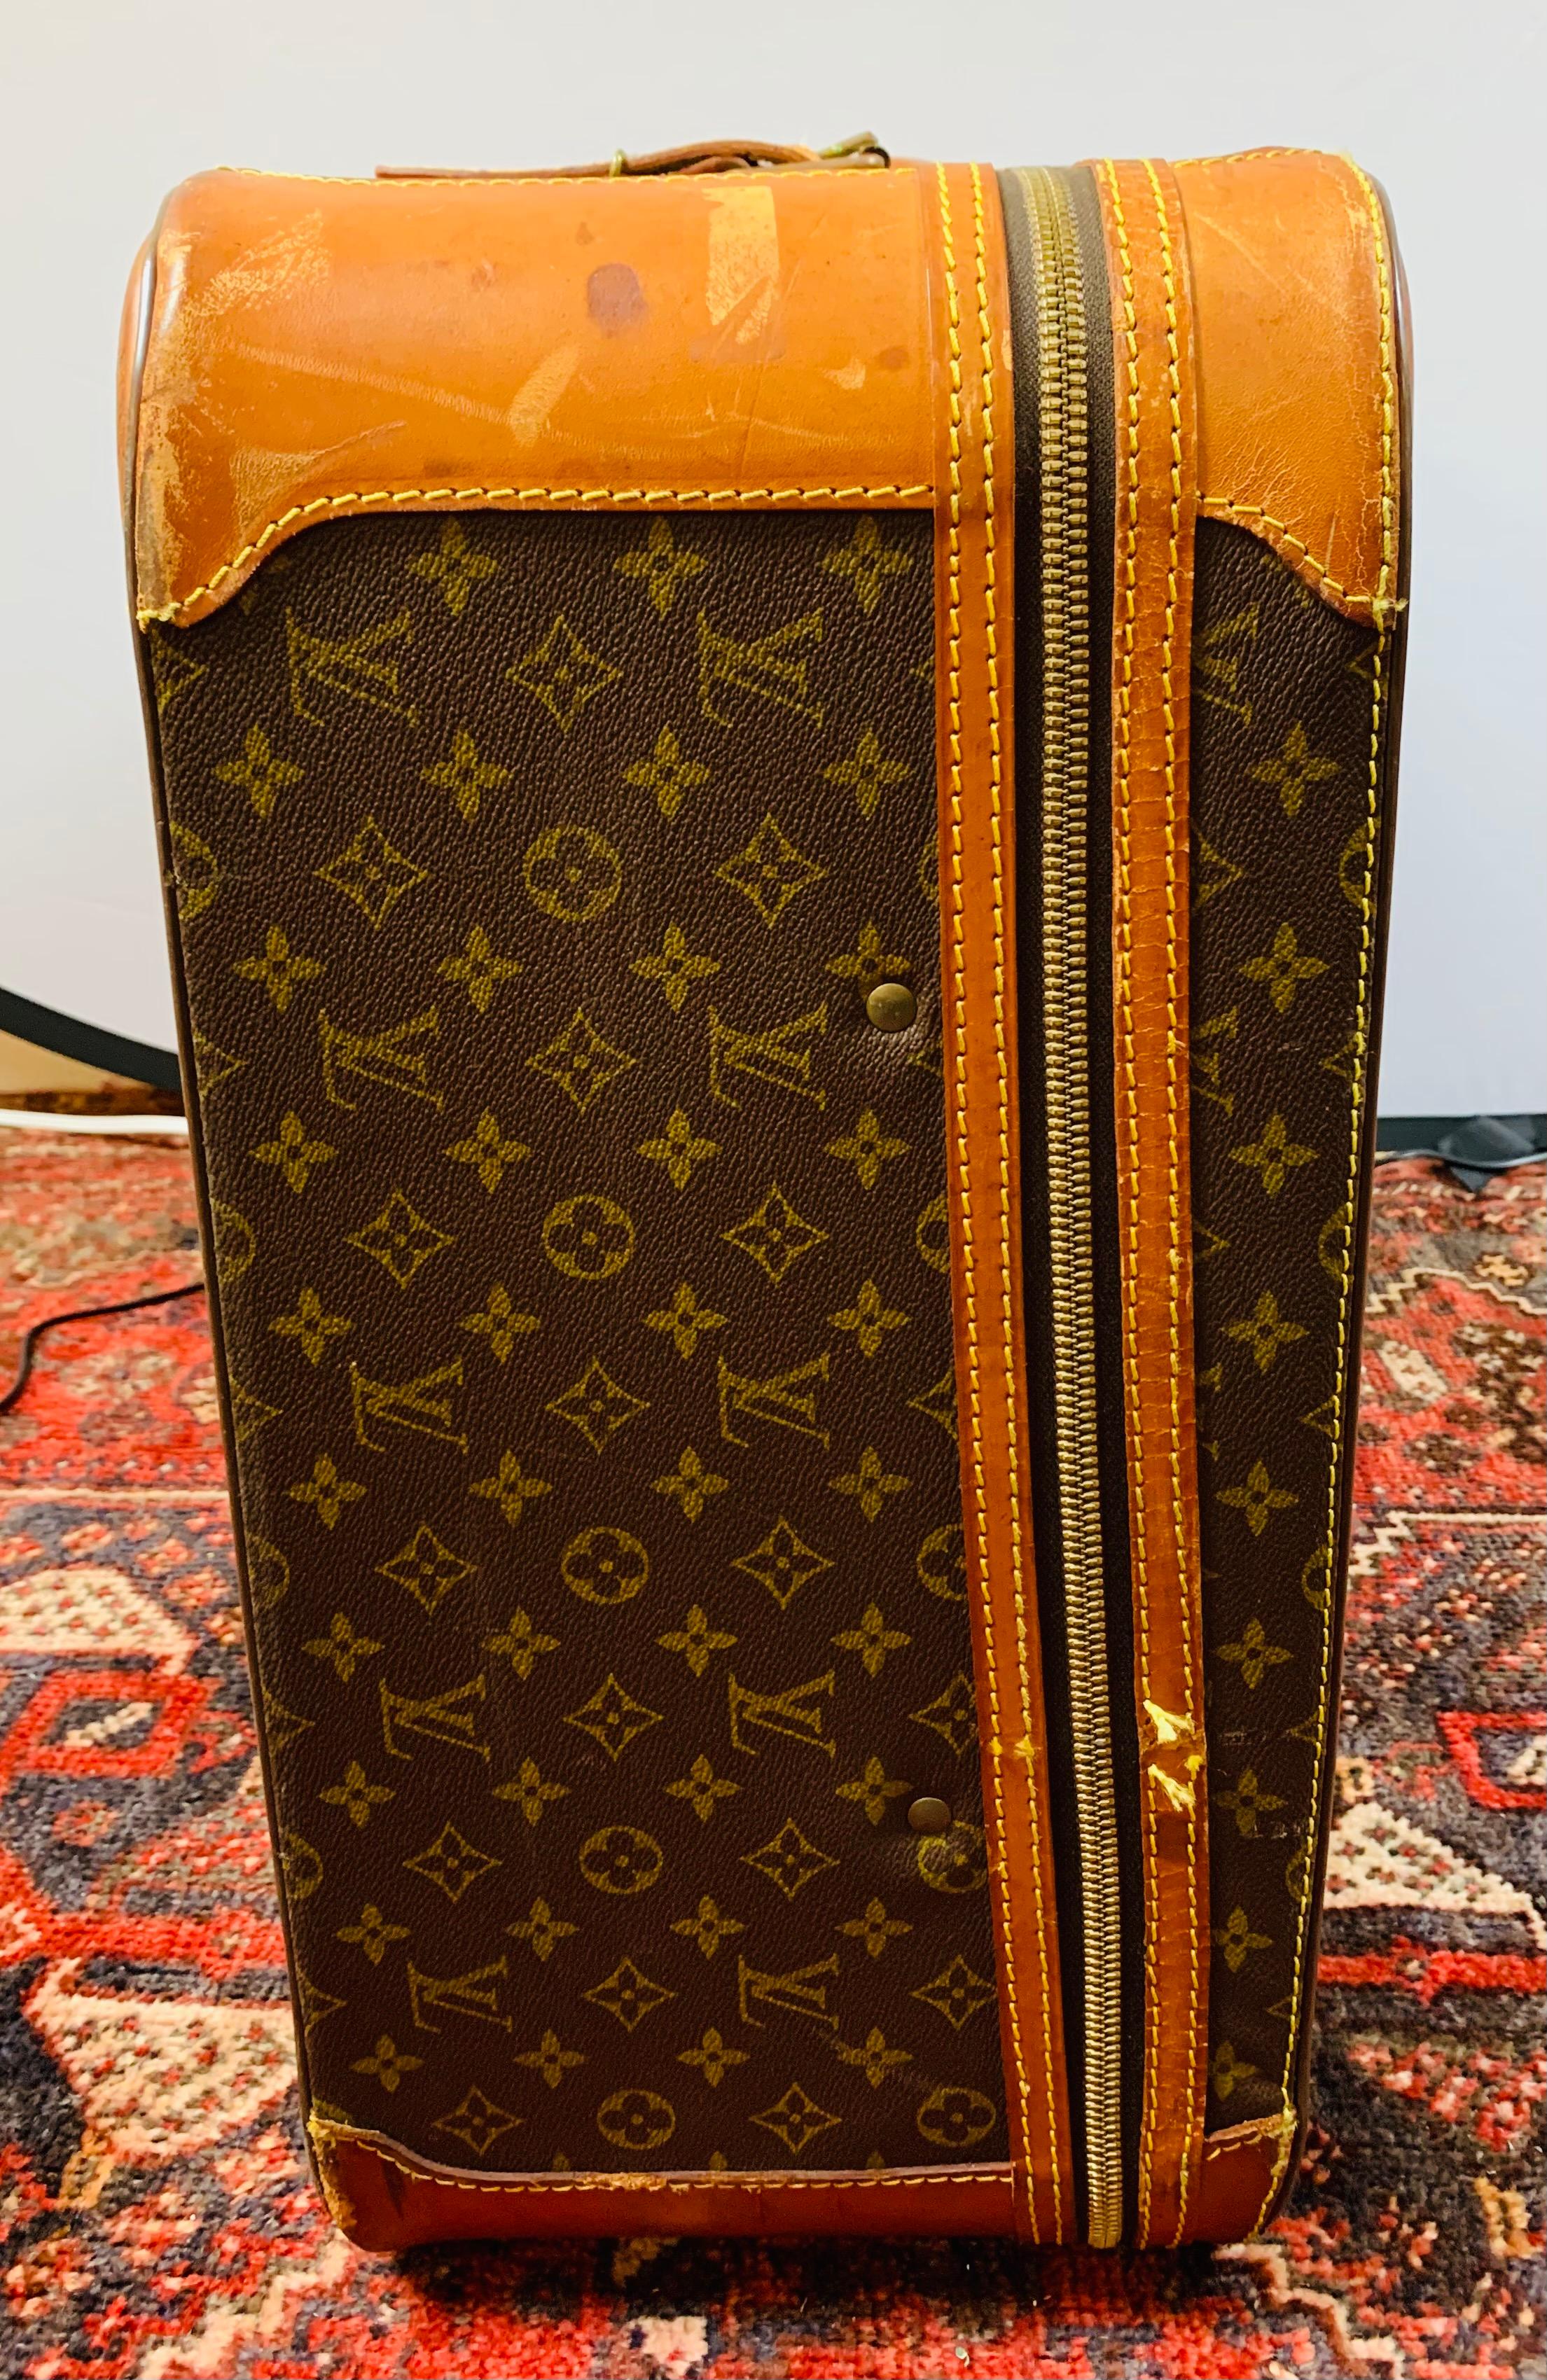 Late 20th Century Louis Vuitton Monogram Holdall Luggage Bag or Suitcase